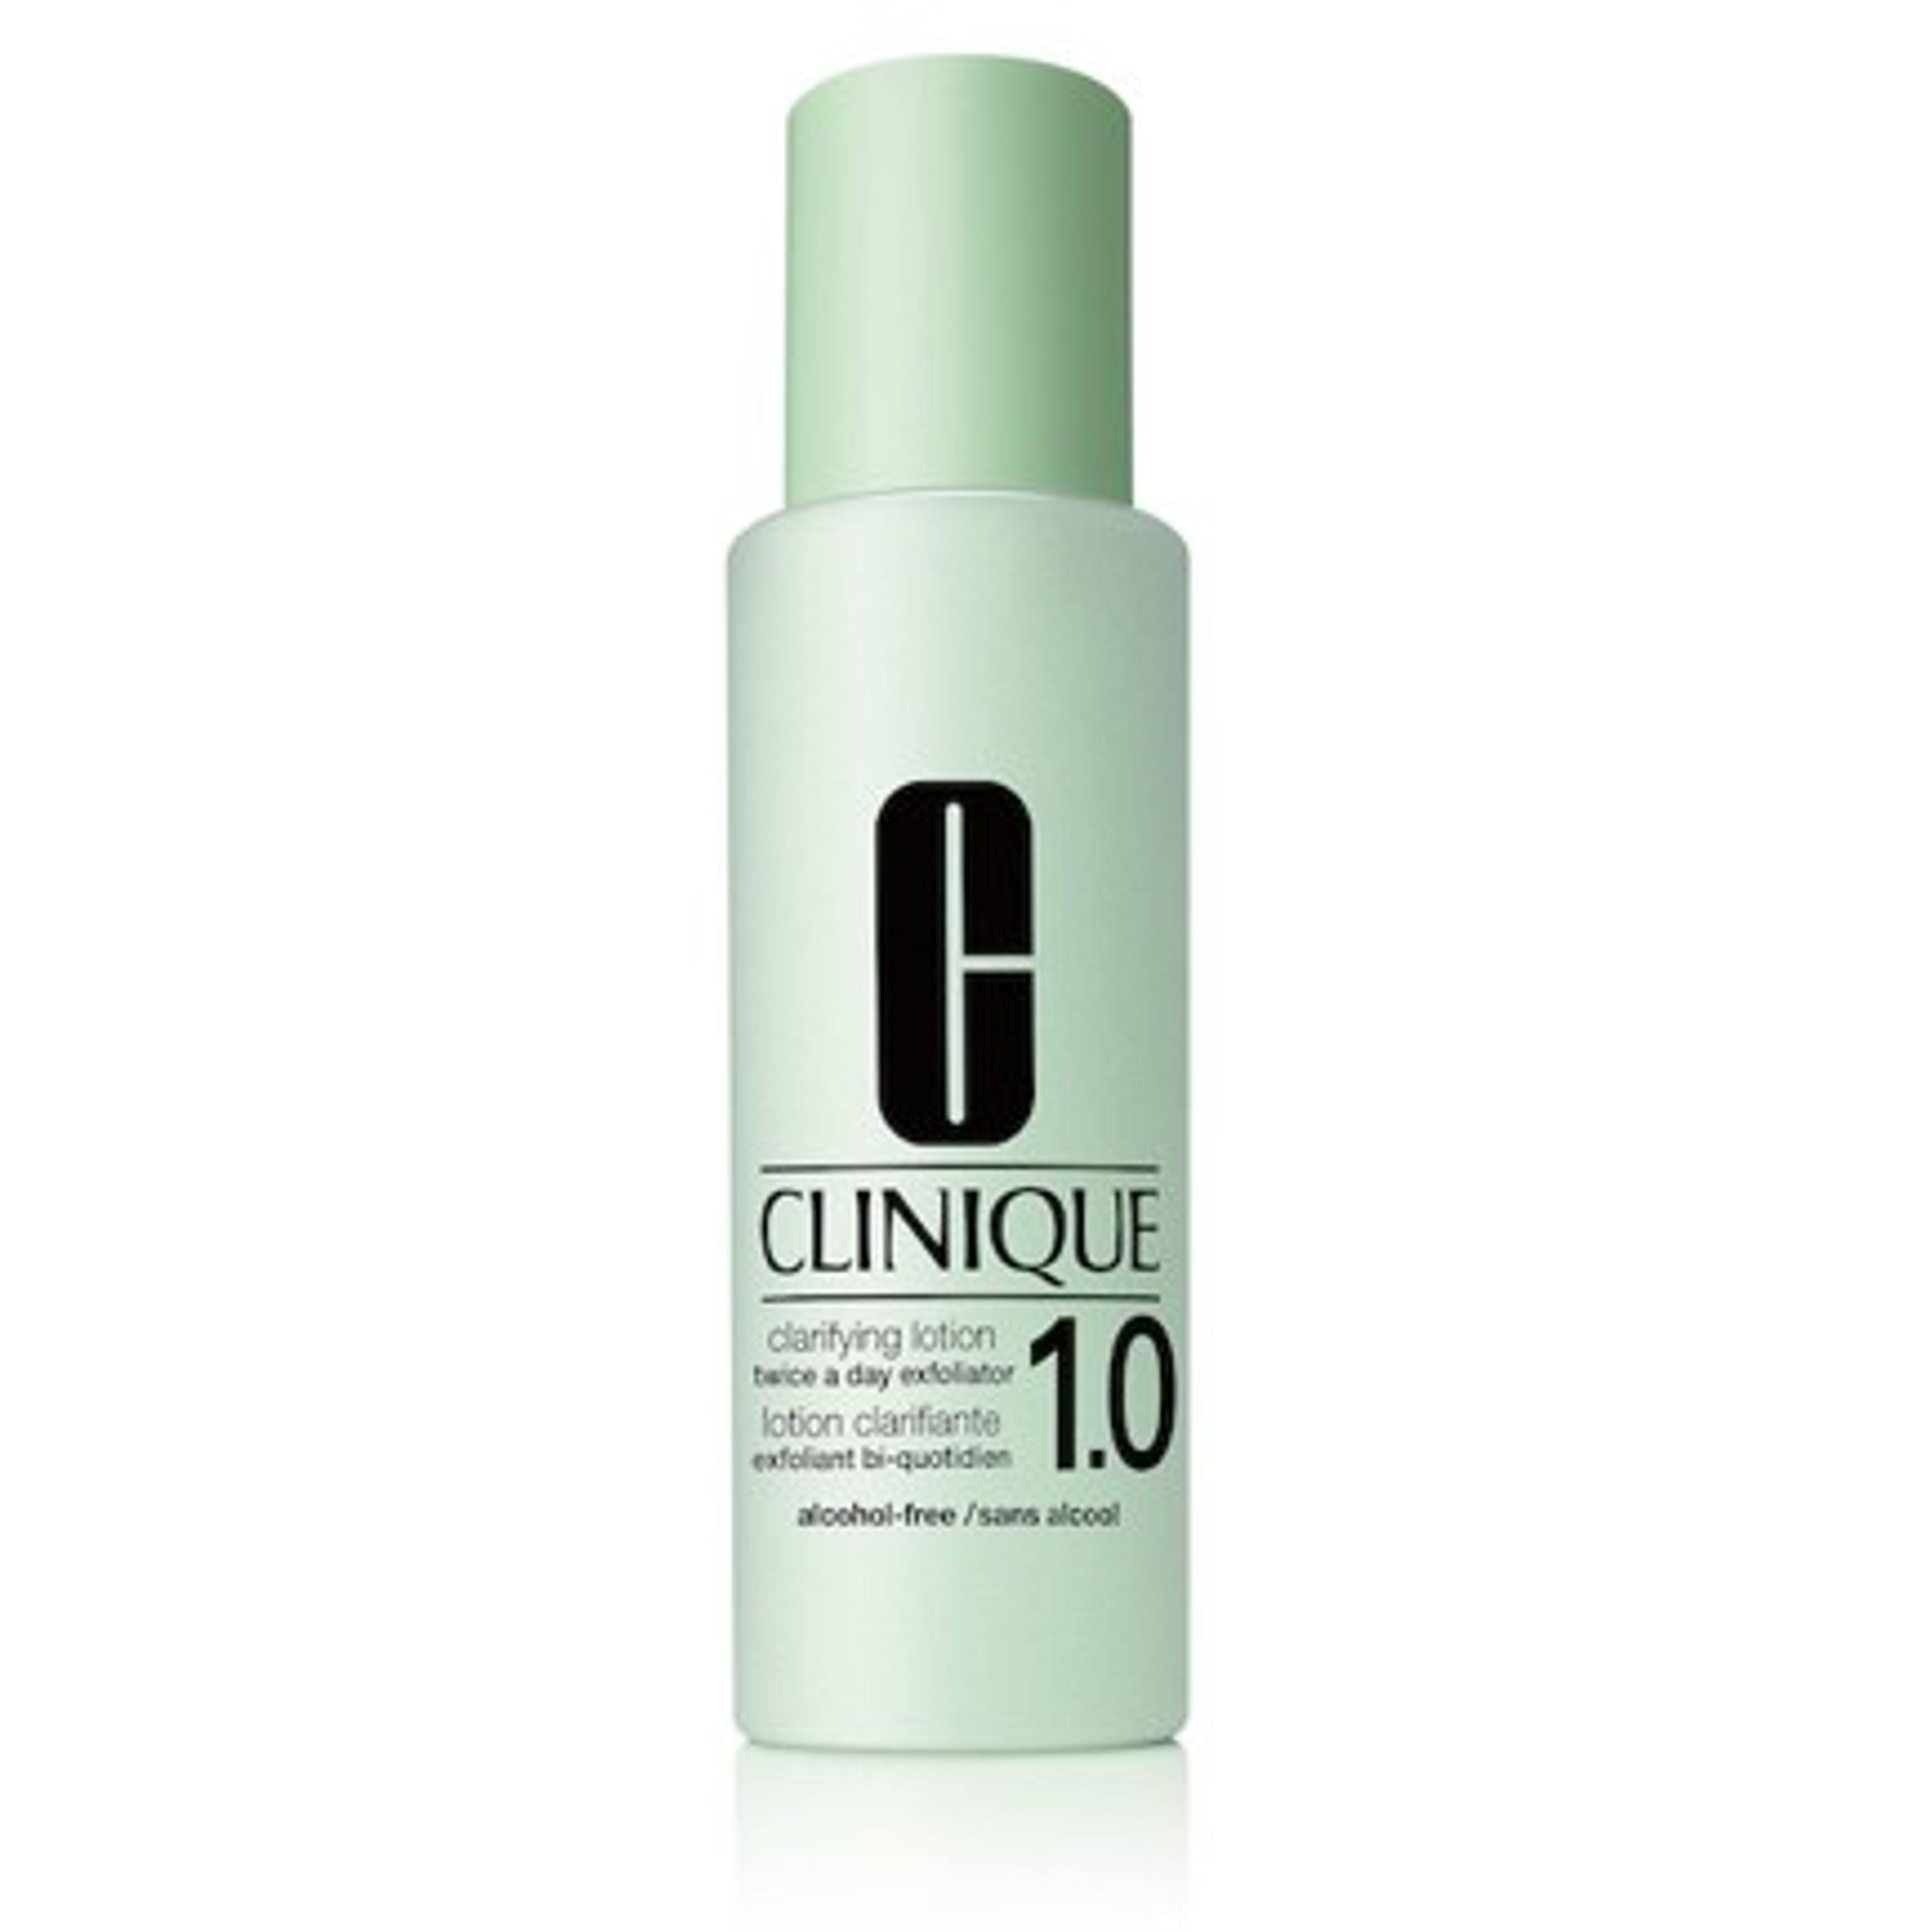 Clinique Clarifying Lotion 1.0 Twice A Day Exfoliator 1